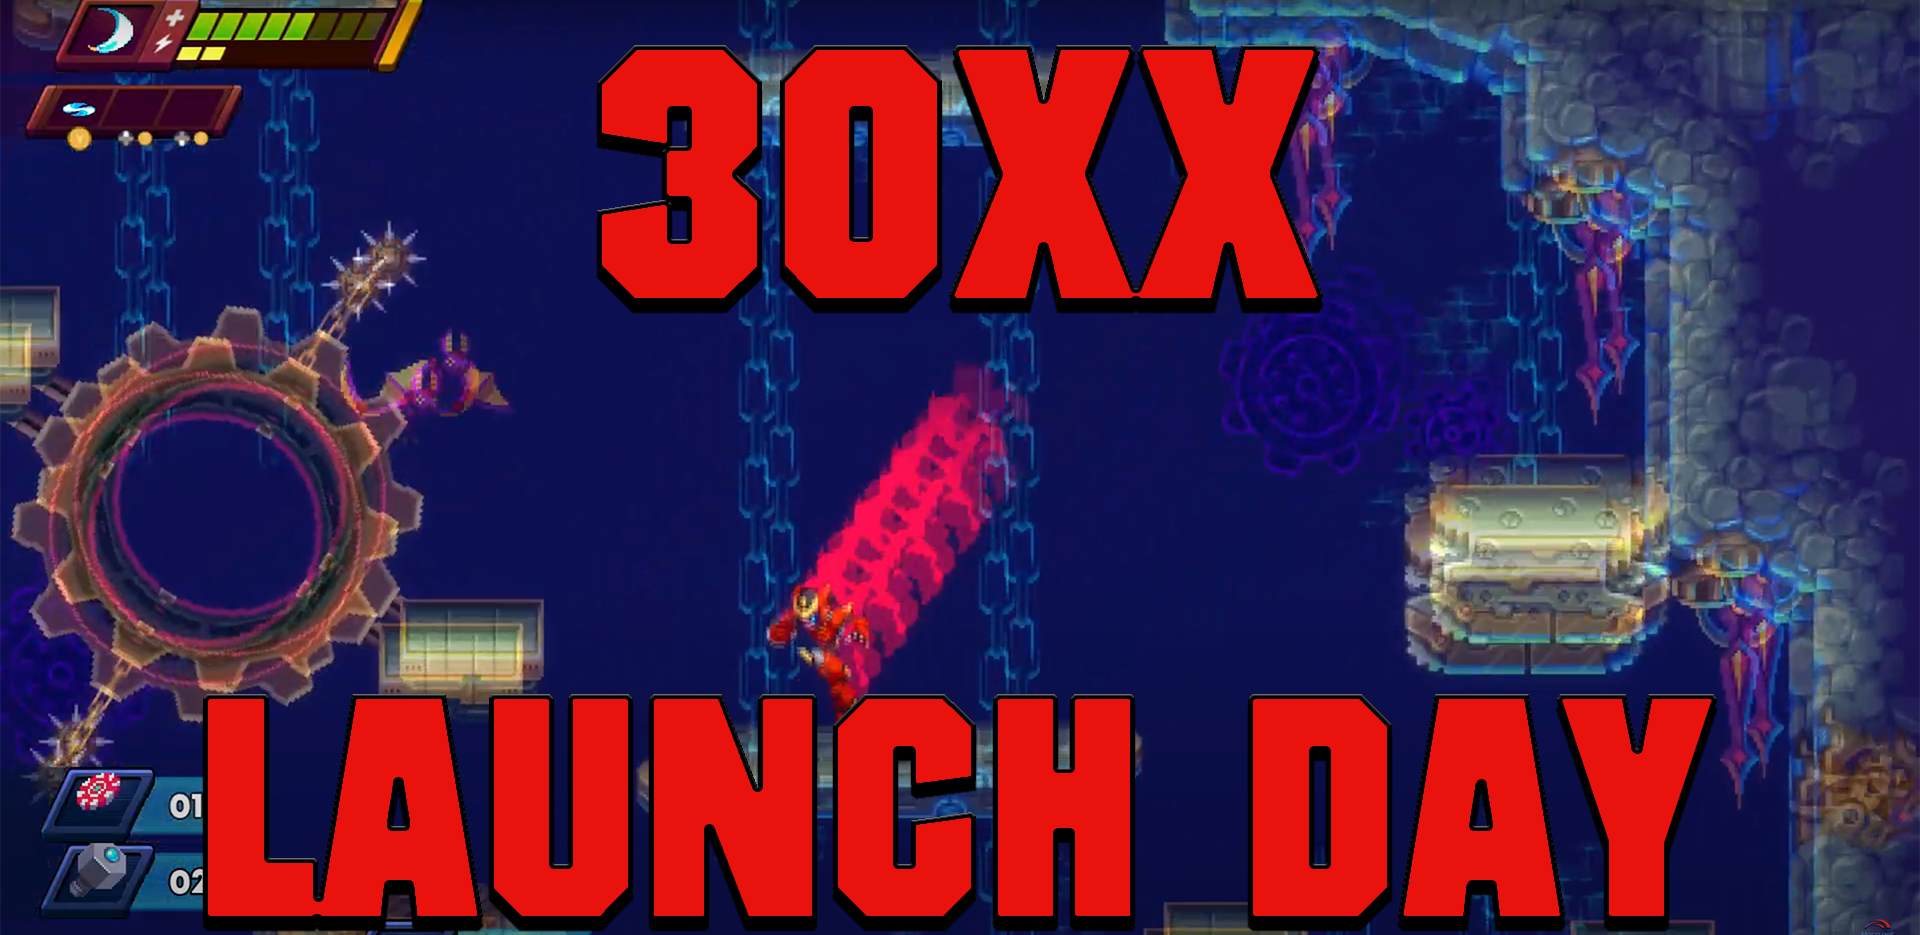 30XX has released/launched! Here are two videos, one CO-OP the other regular gameplay footage!